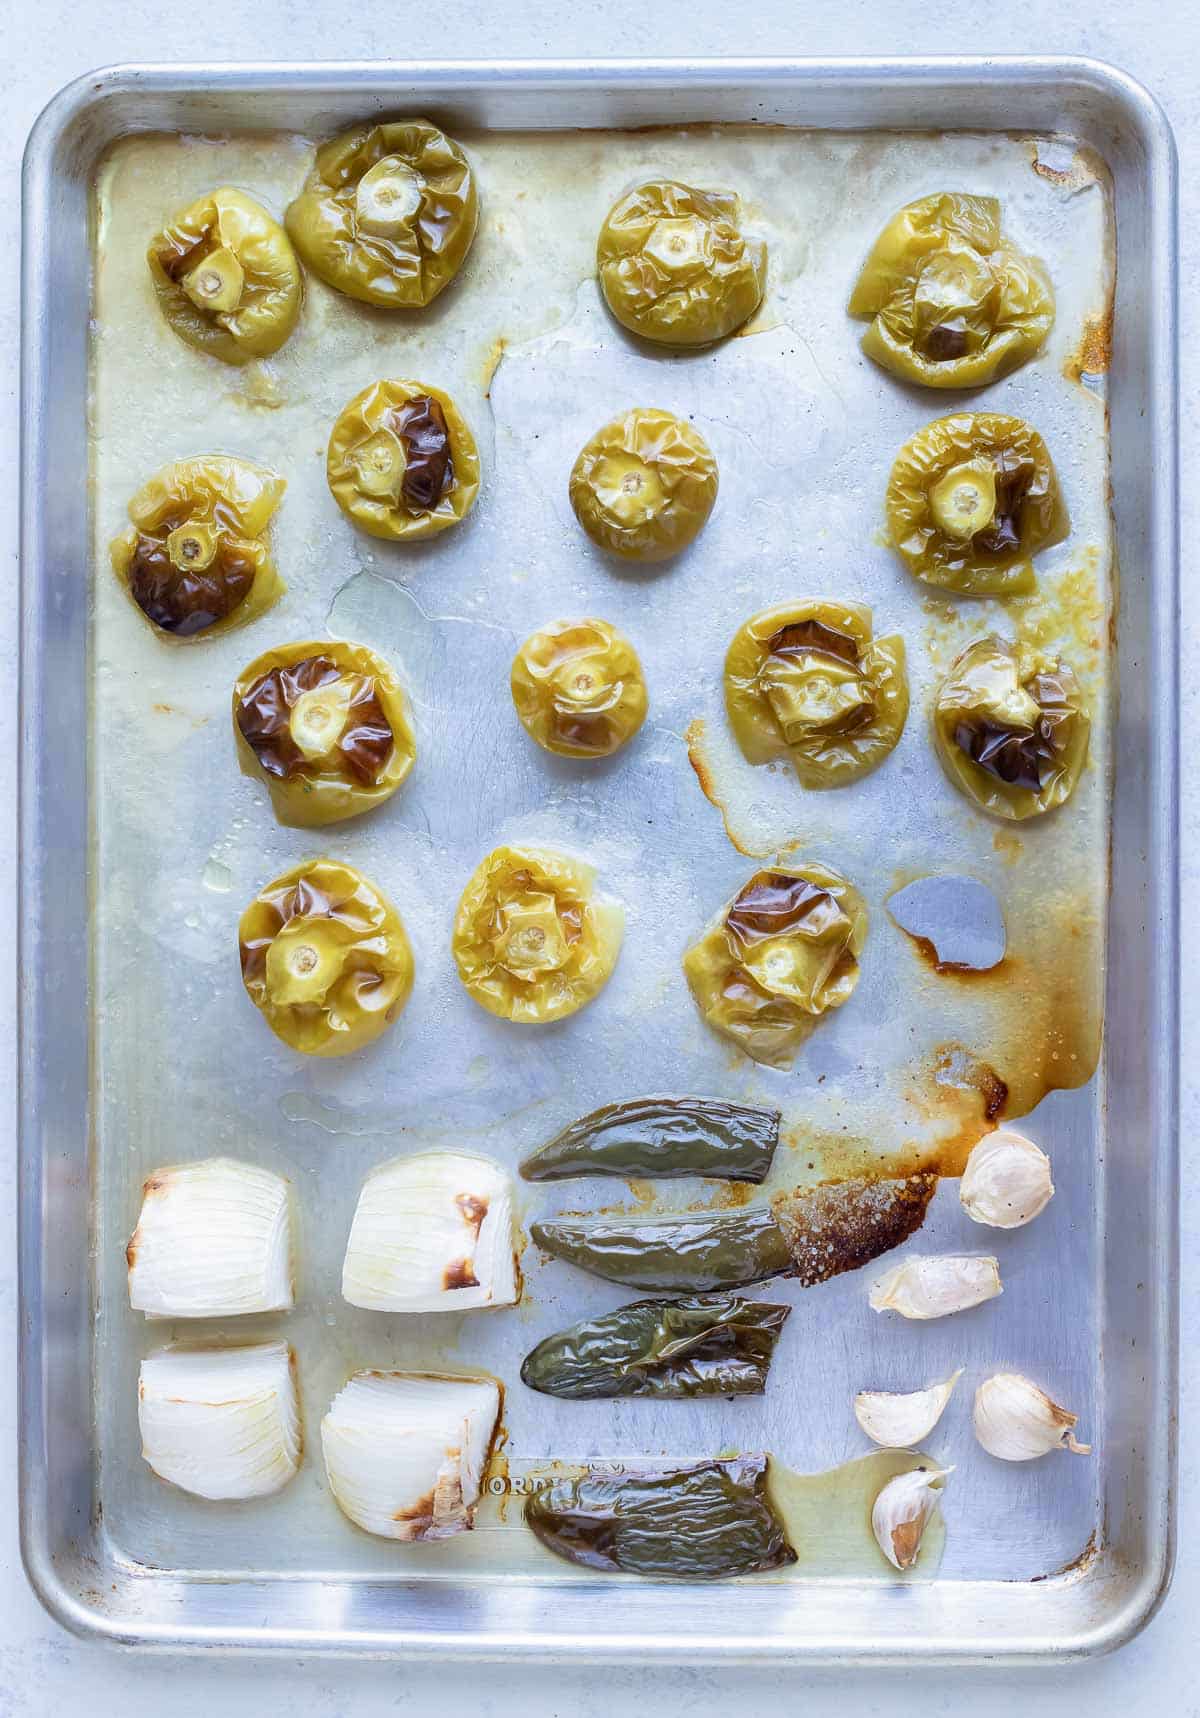 Tomatillos, onion, jalapeño peppers, and garlic are roasted in the oven.